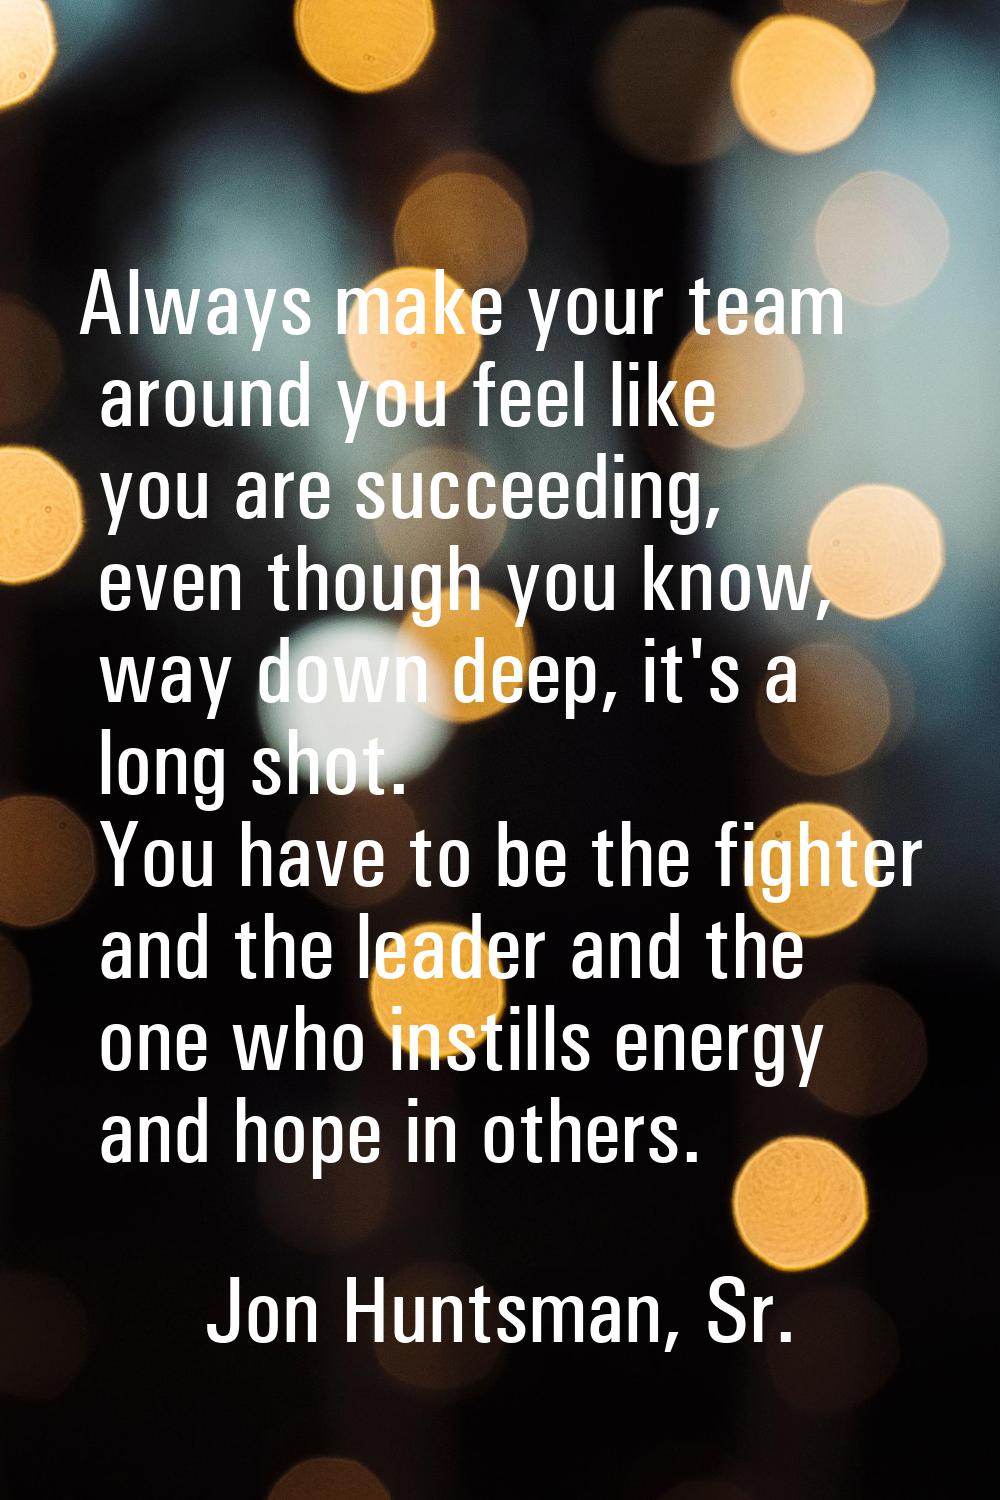 Always make your team around you feel like you are succeeding, even though you know, way down deep,